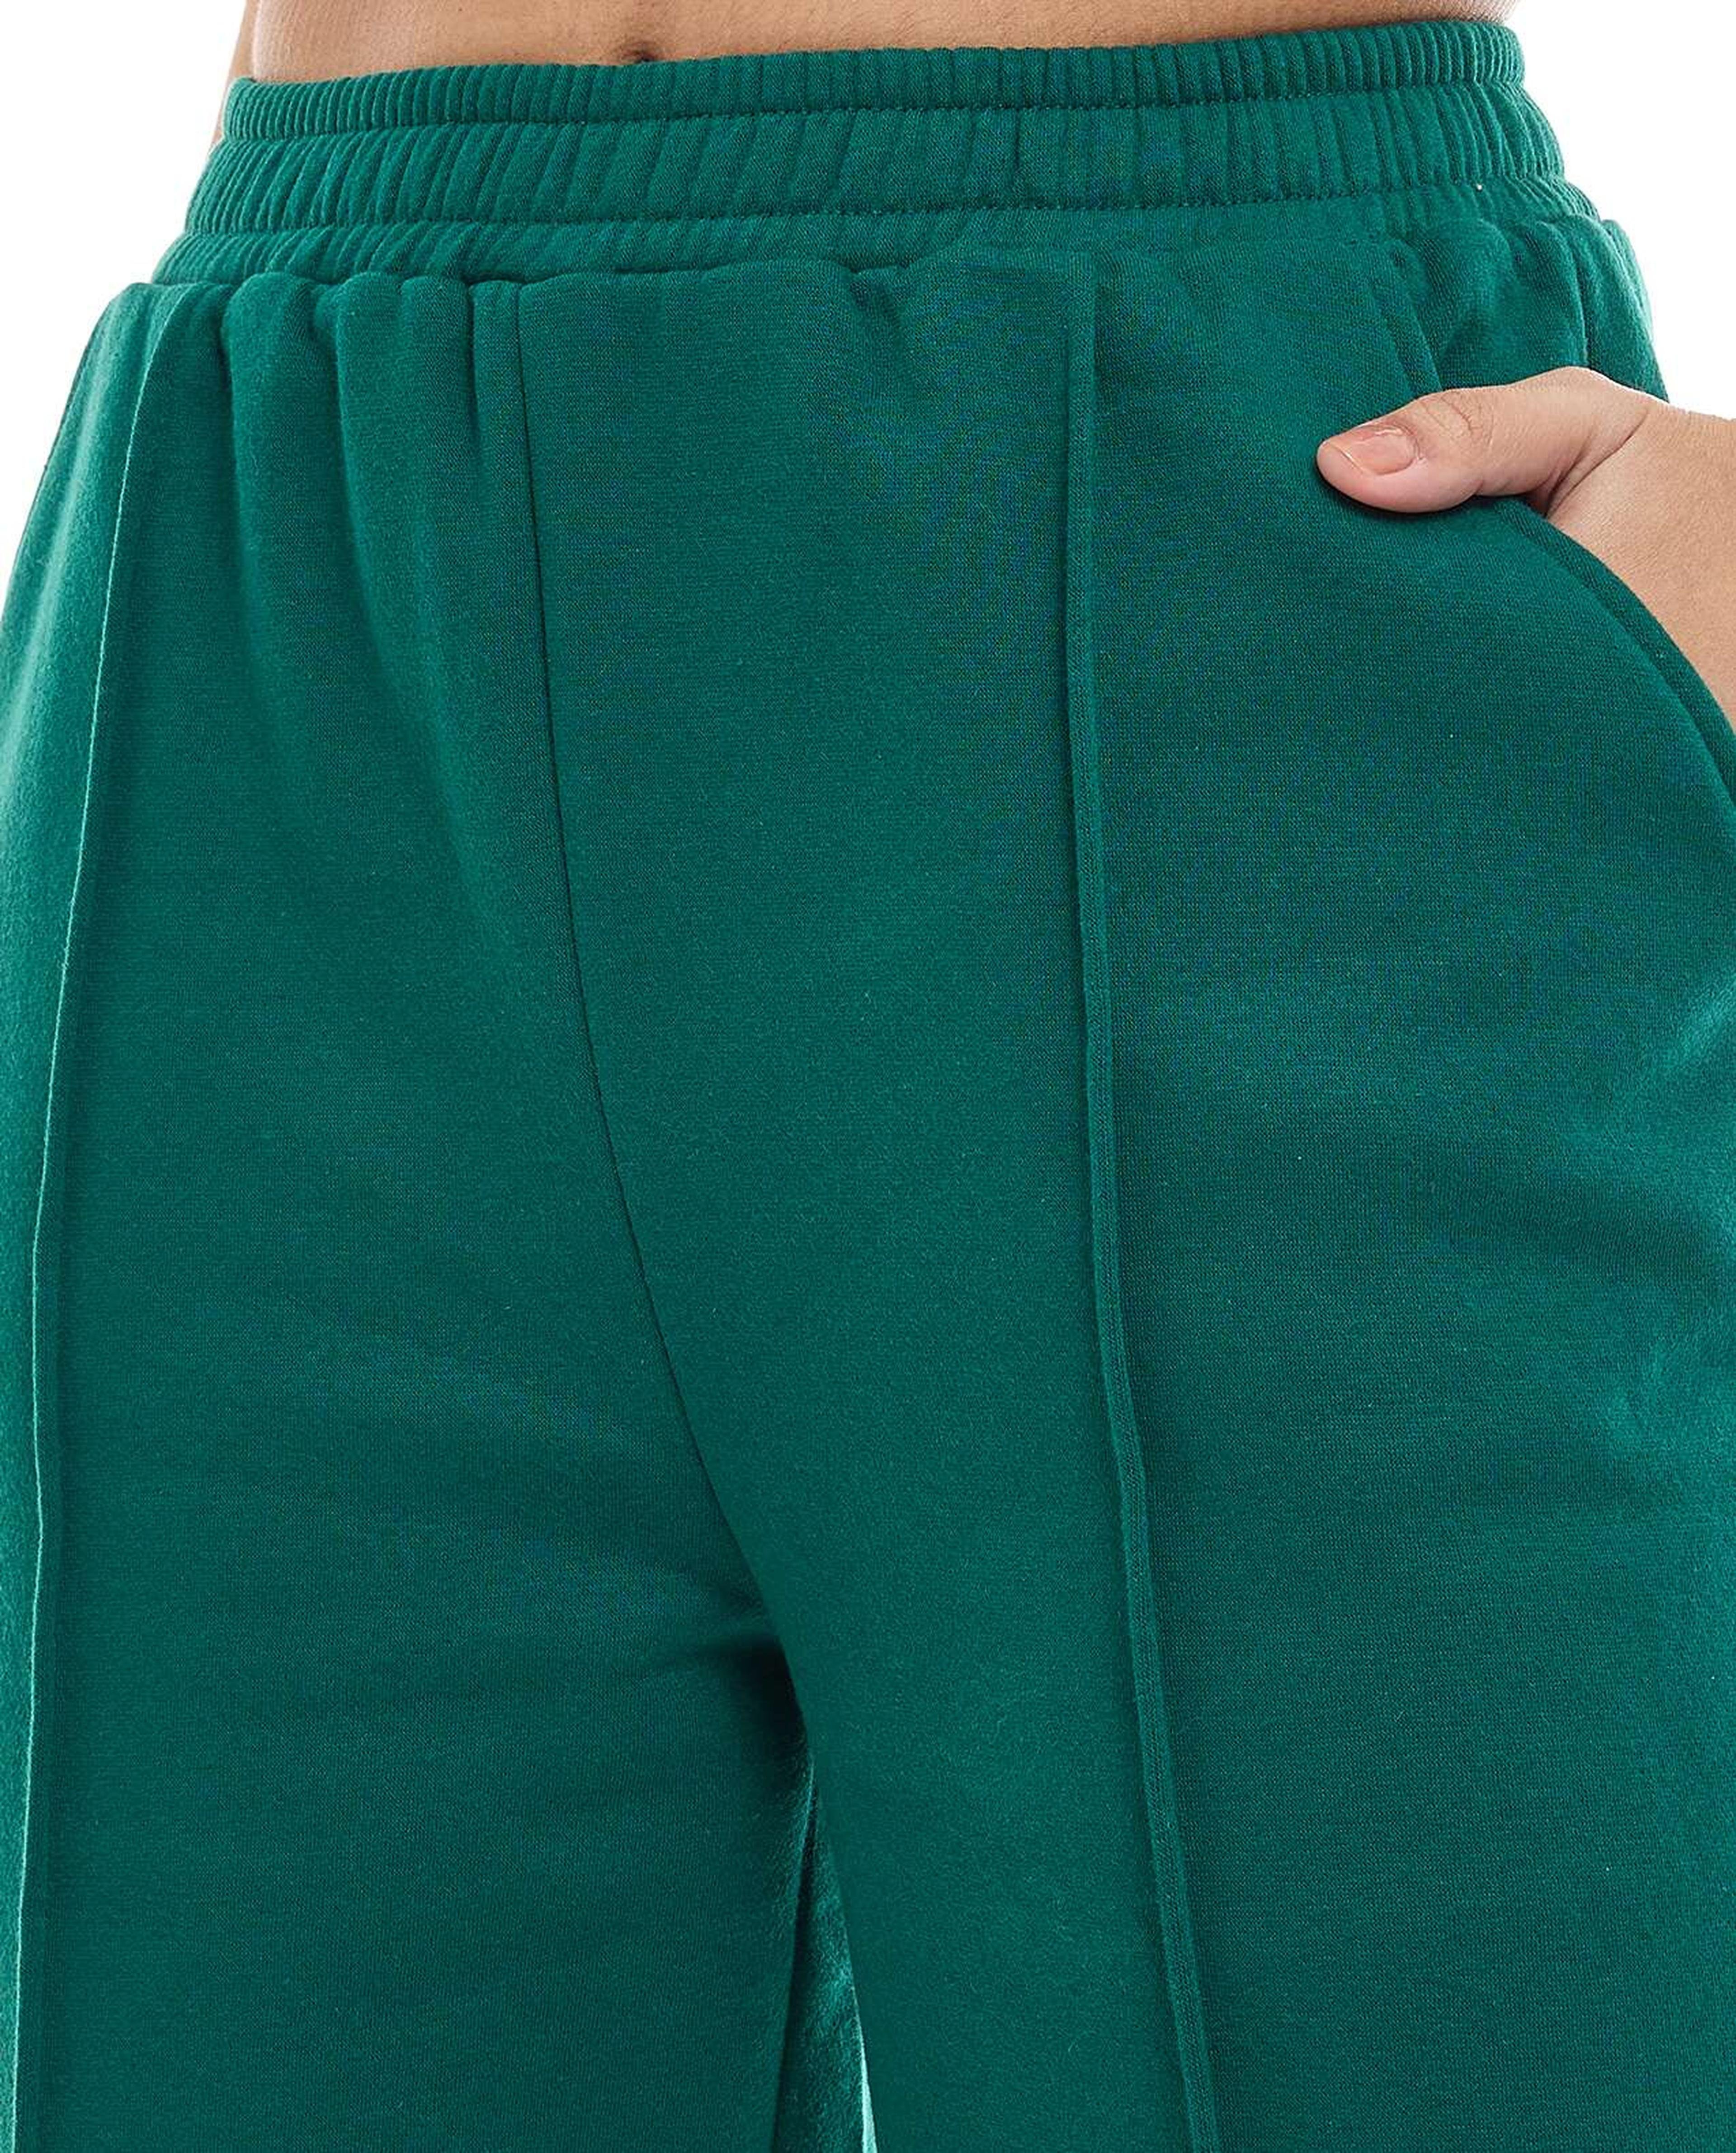 Solid Sweatpants with Elastic Waist